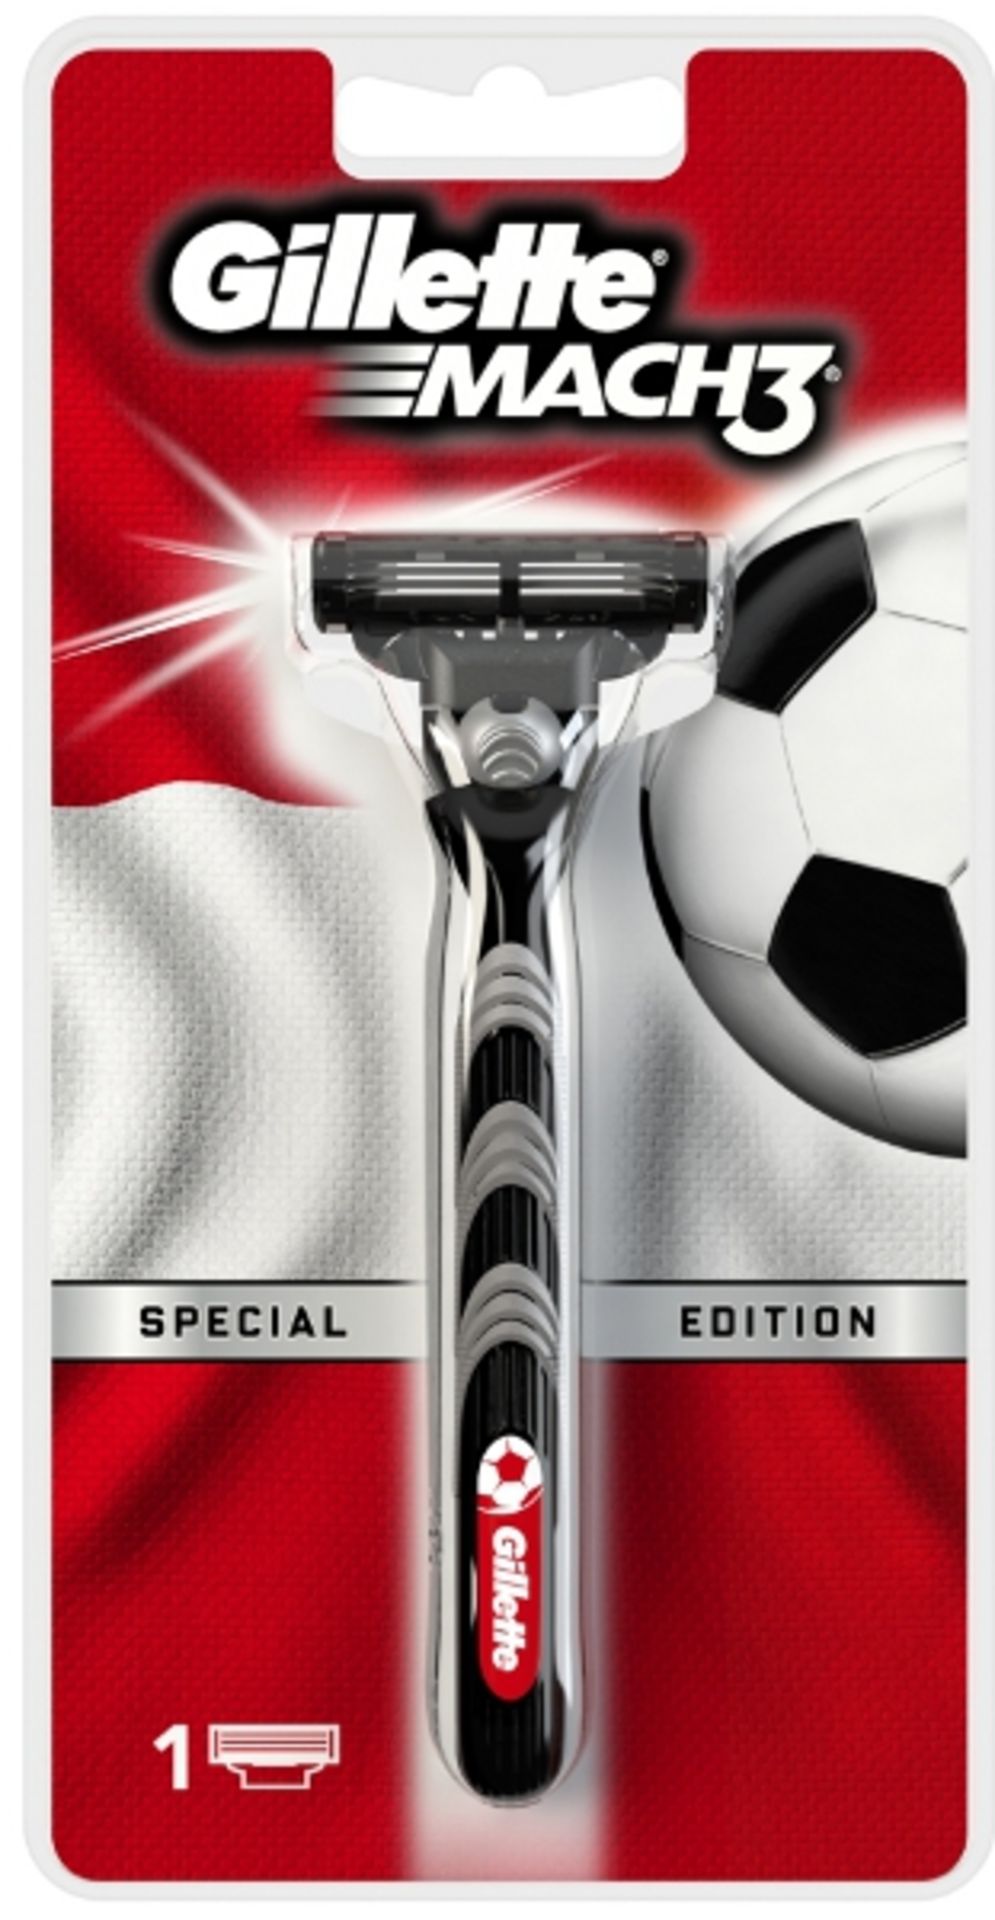 V *TRADE QTY* Brand New Gillette Mach3 Football Special Edition X 6 YOUR BID PRICE TO BE